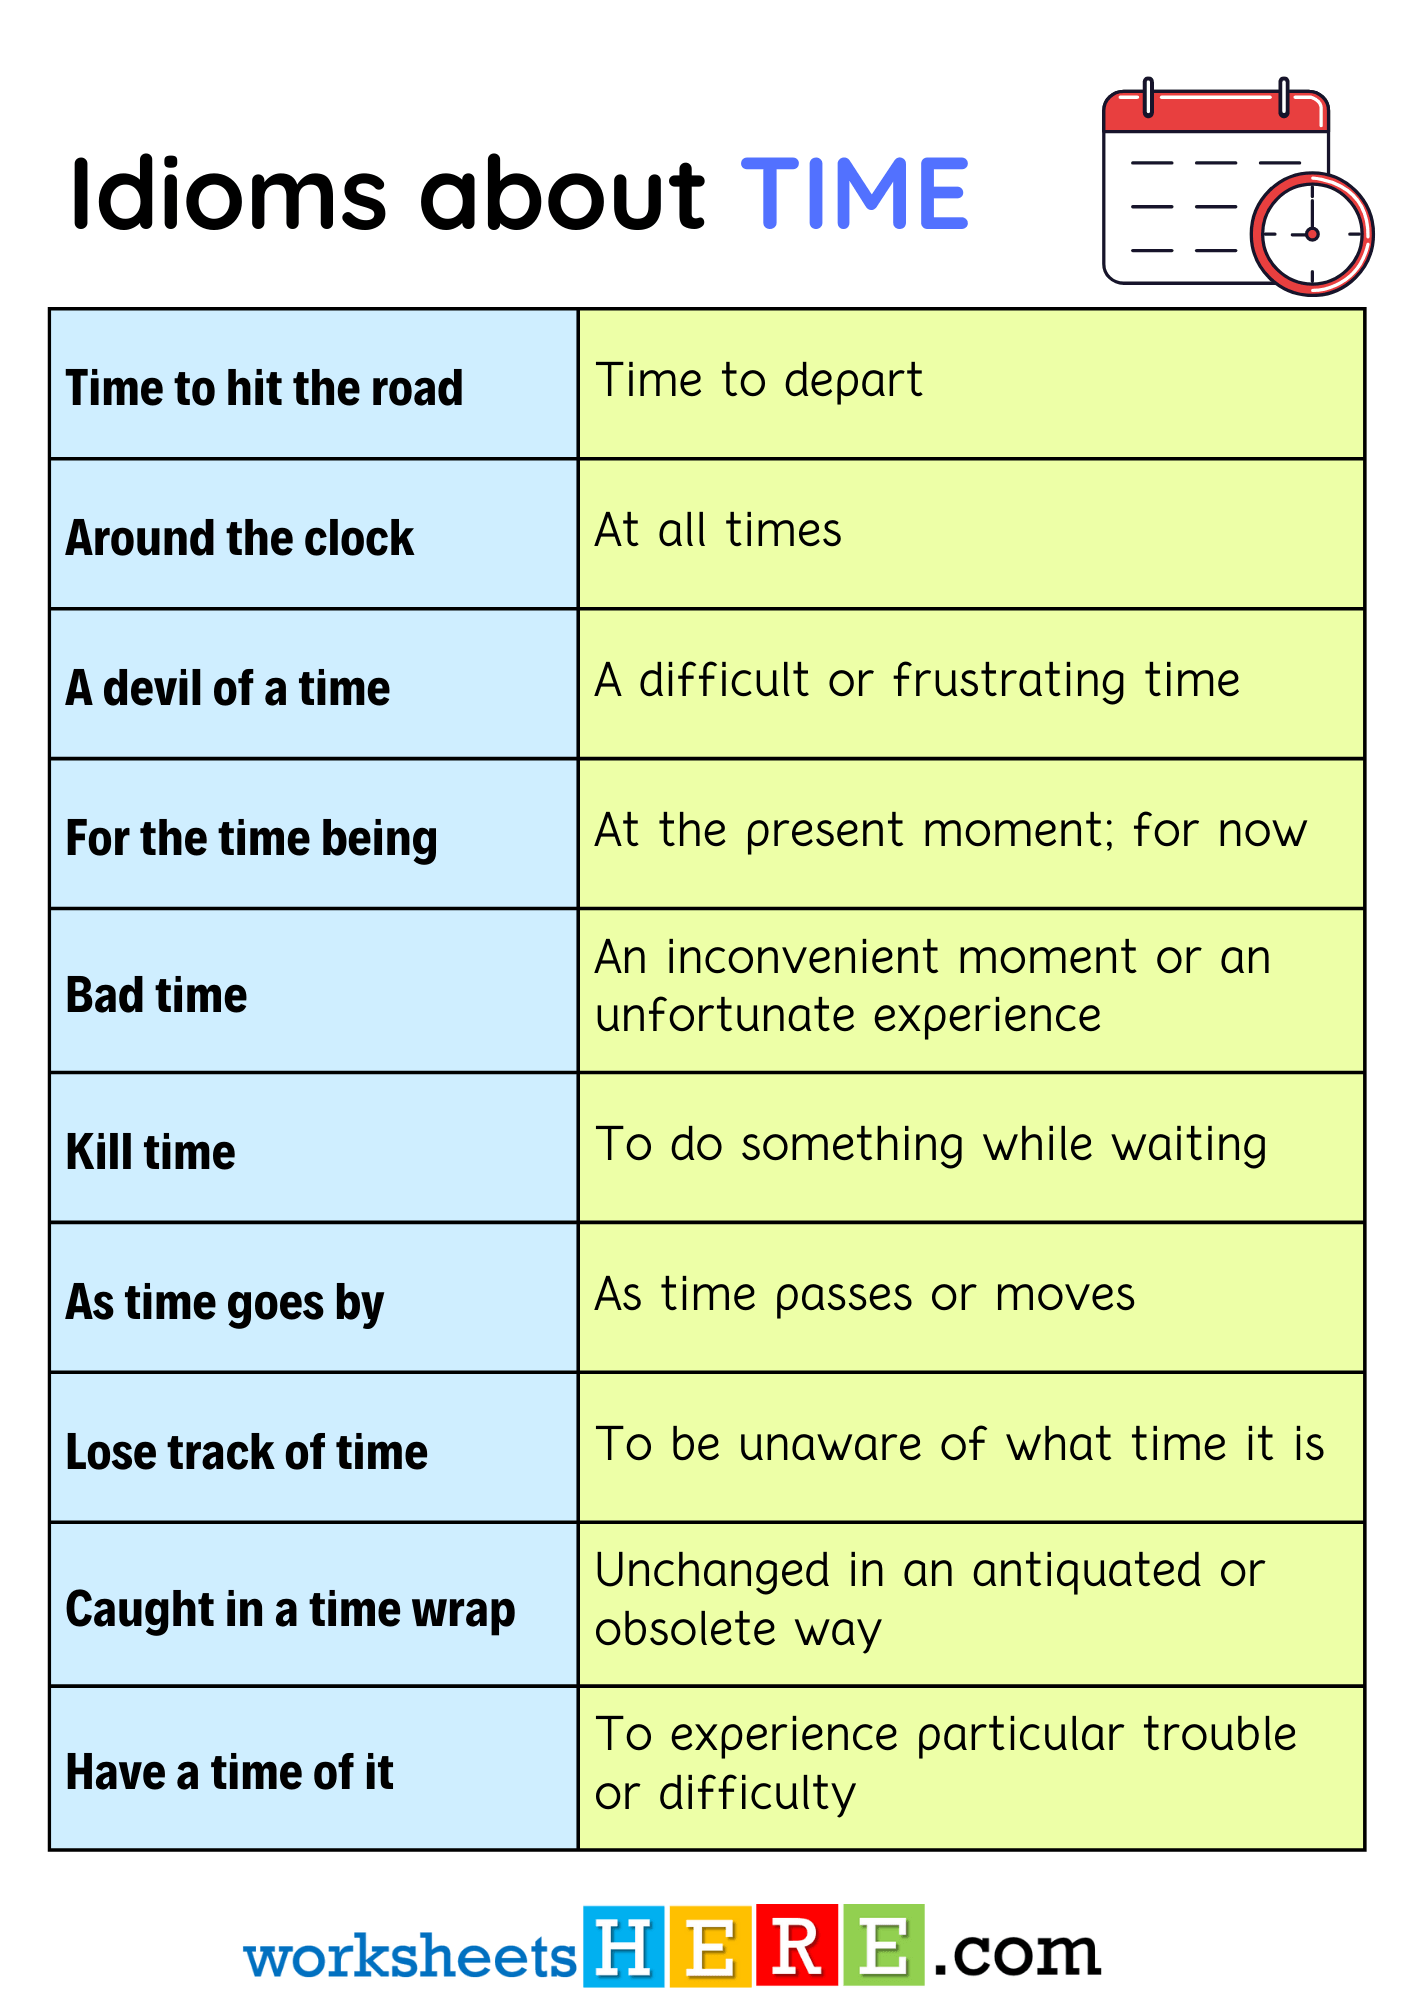 Idioms about TIME and Meanings PDF Worksheet For Studens and Kids